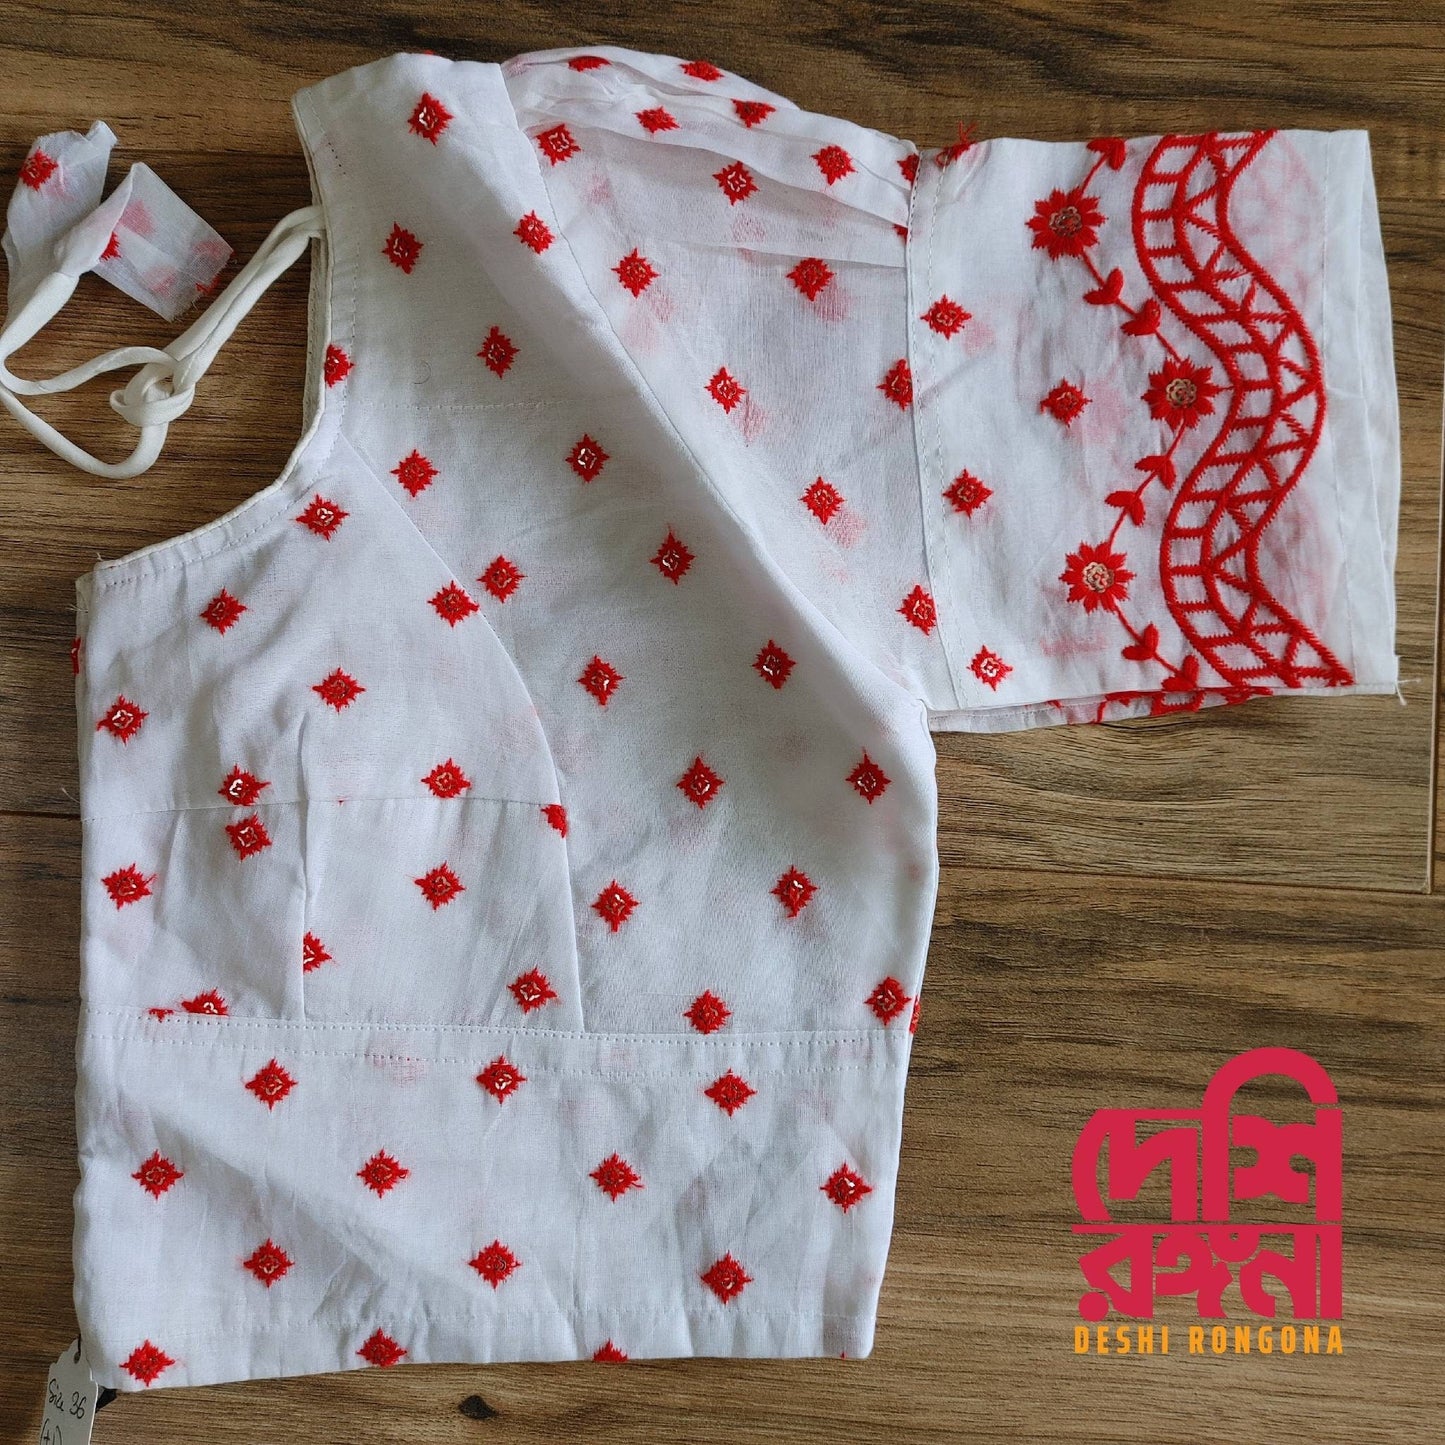 White-Red Cotton Blouse, Durga Puja Theme Readymade Blouse, Size 34-40, Comfortable, goes with any contrast saree collection of your closet